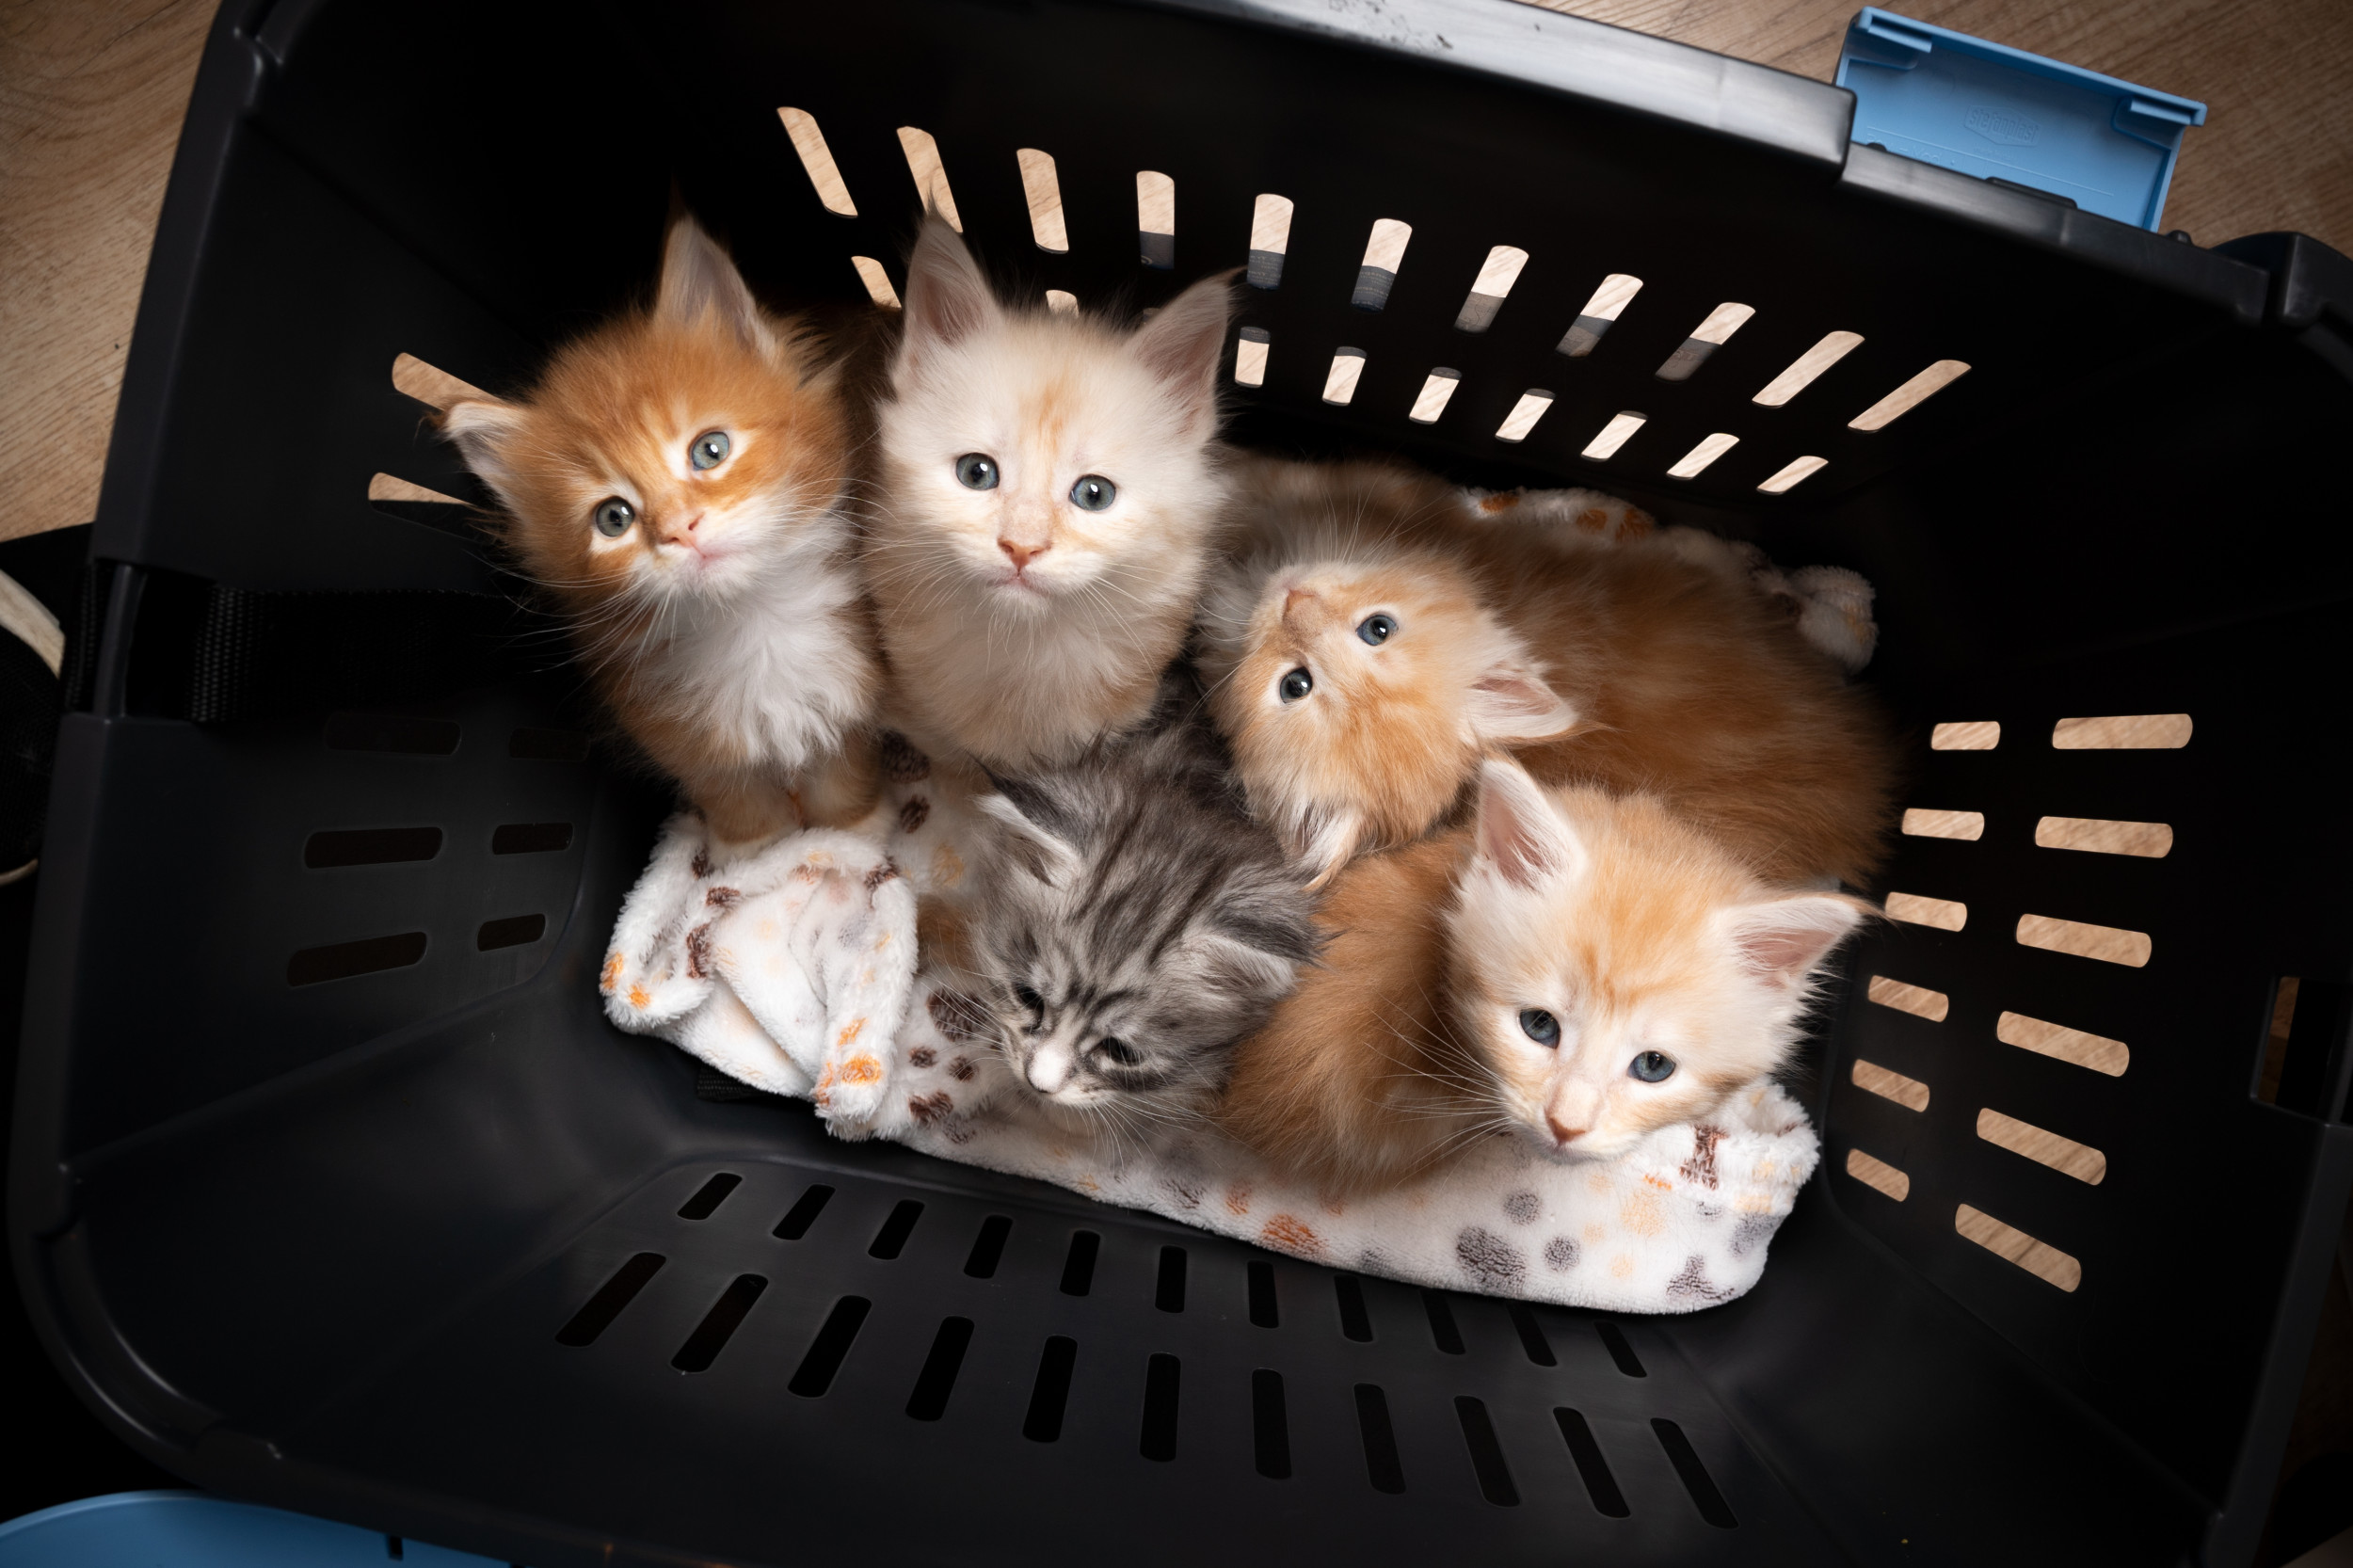 images of kittens